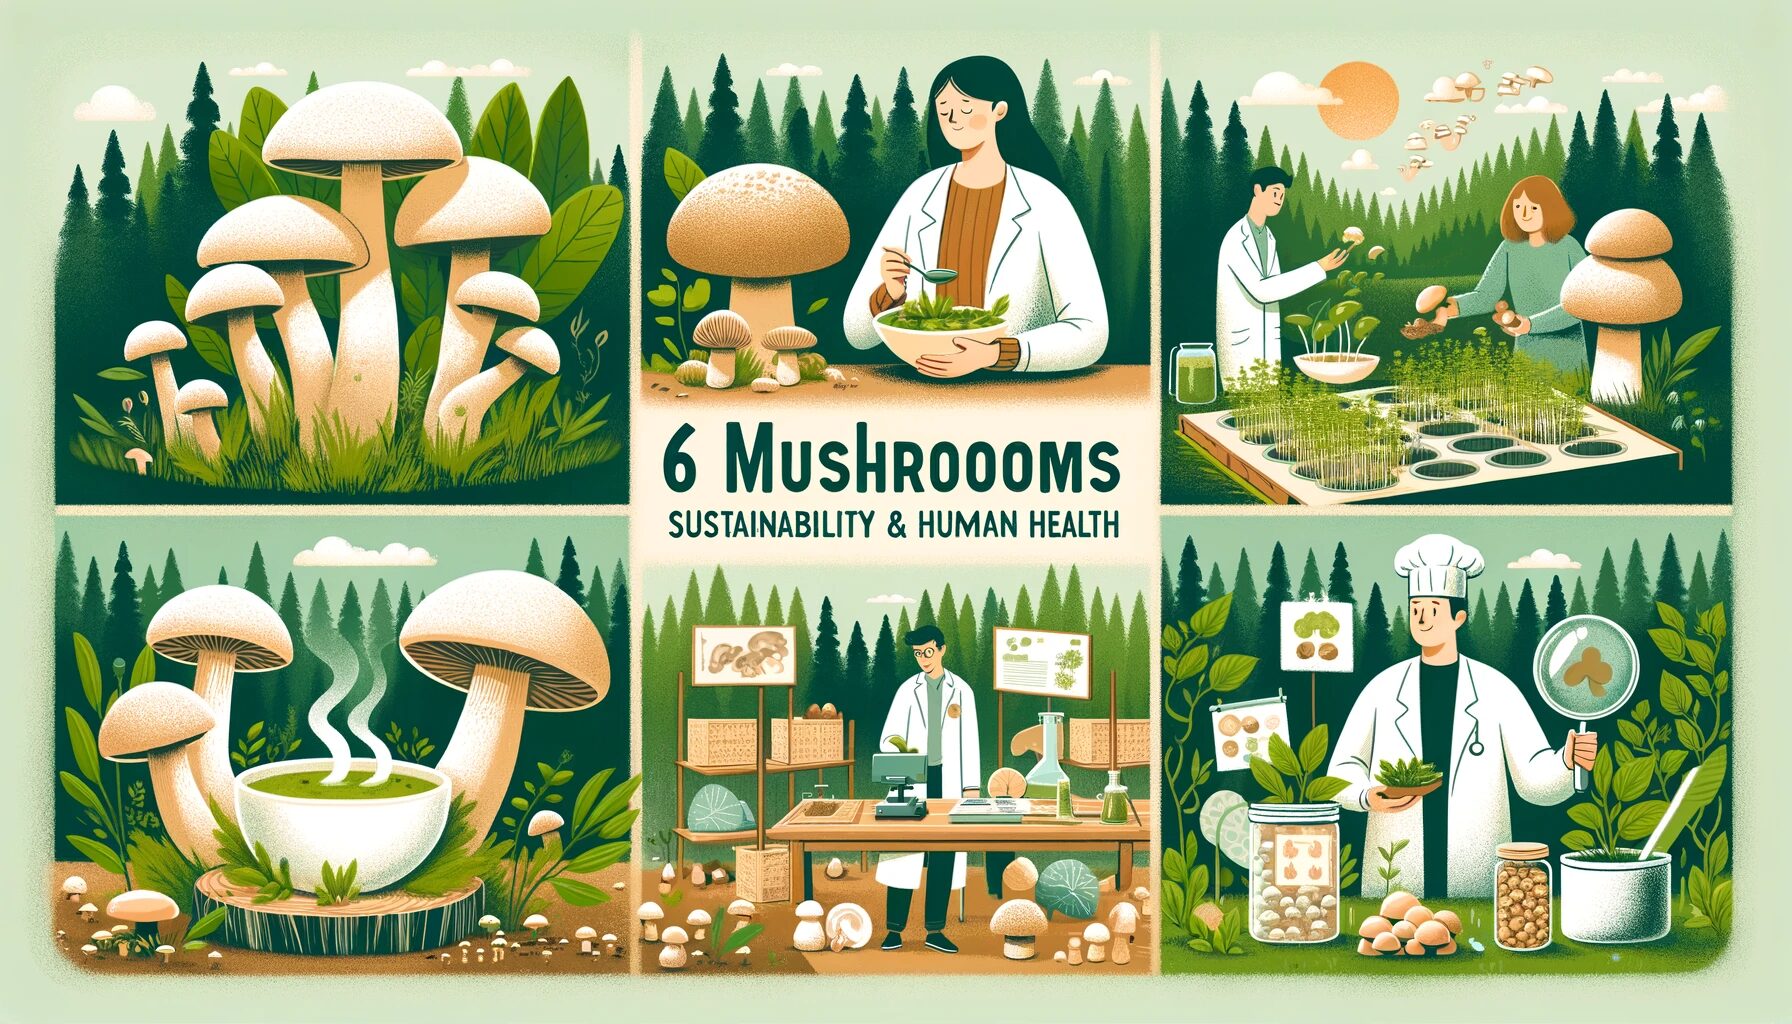 6 Ways Mushrooms Can Impact Sustainability and Human Health